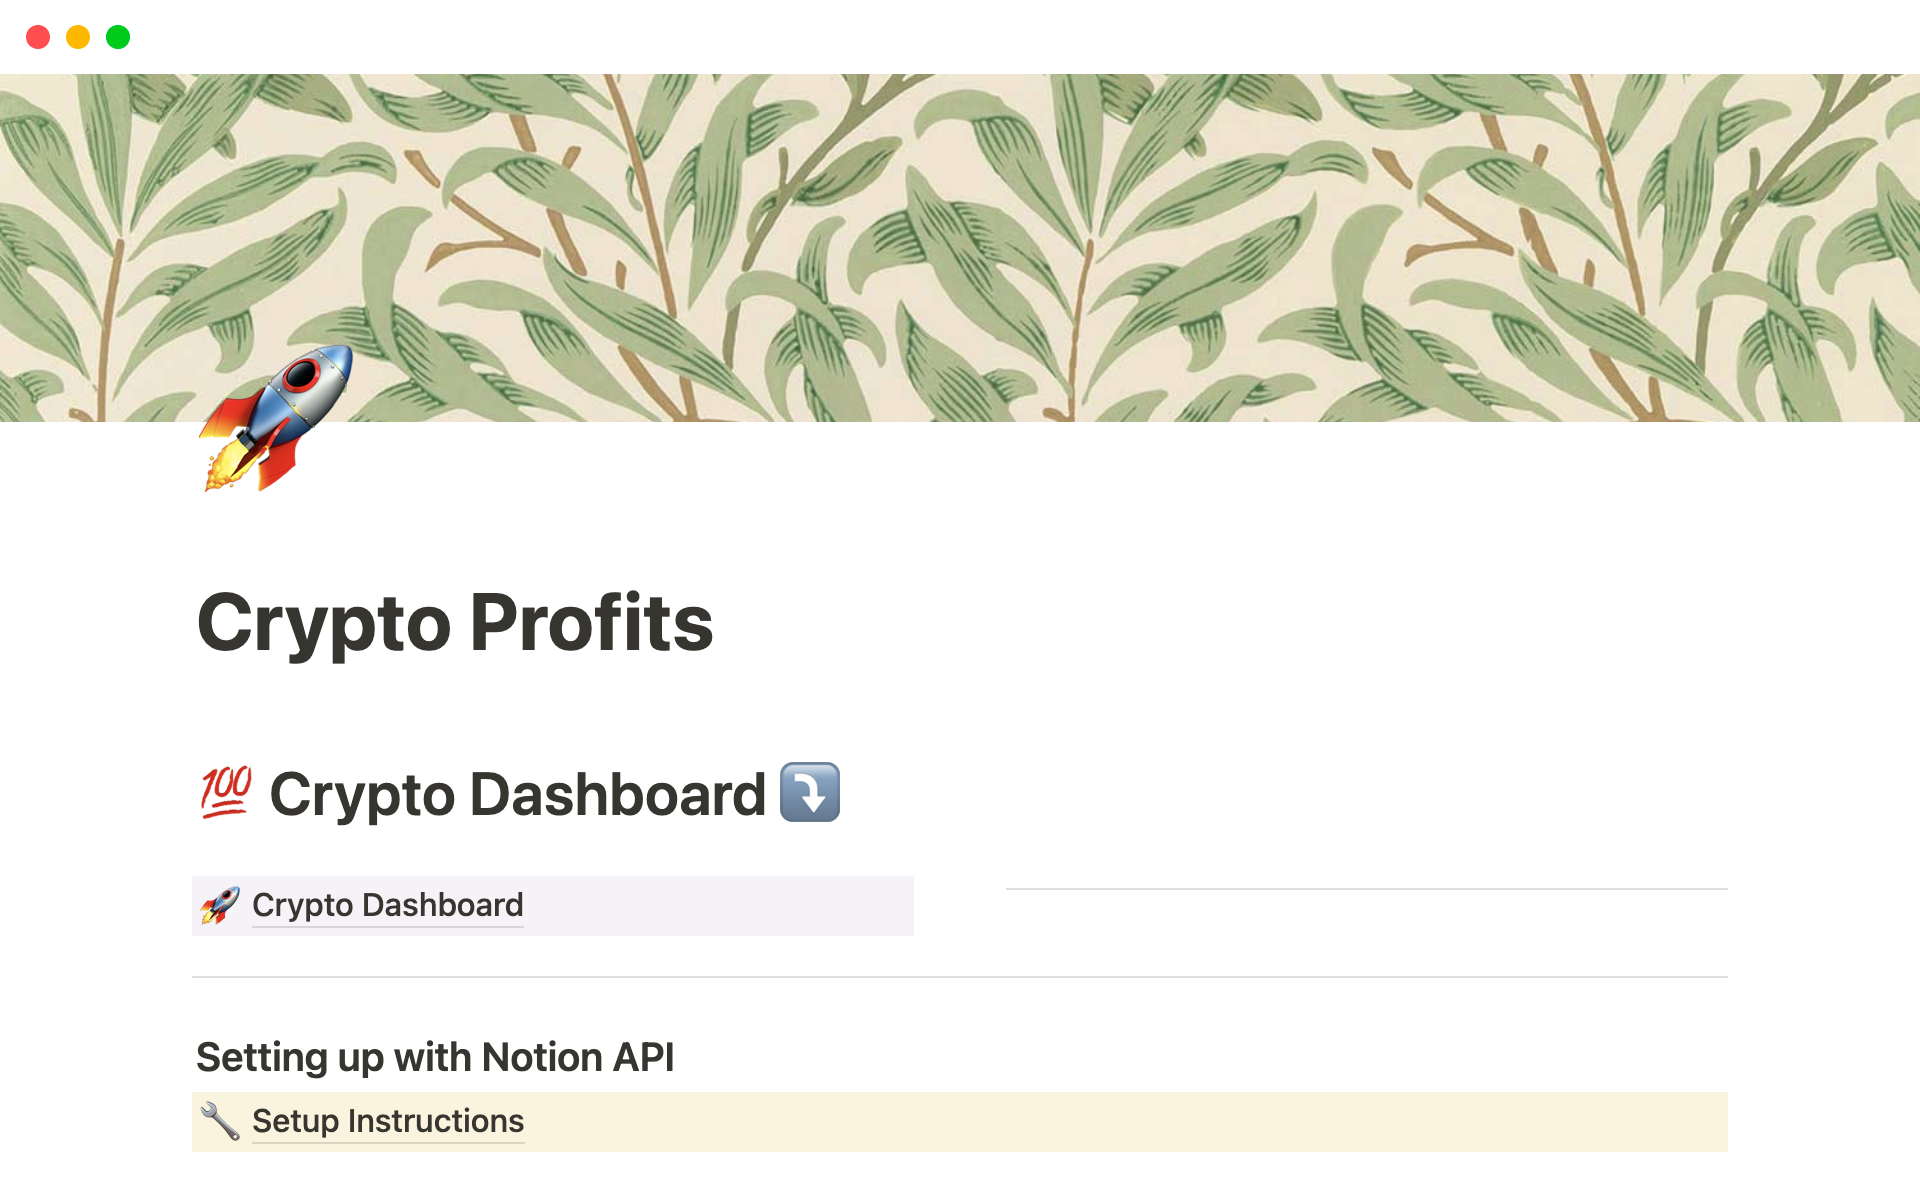 A central, self-updating dashboard for your crypto profits (or losses). The updates are made using Notion API.